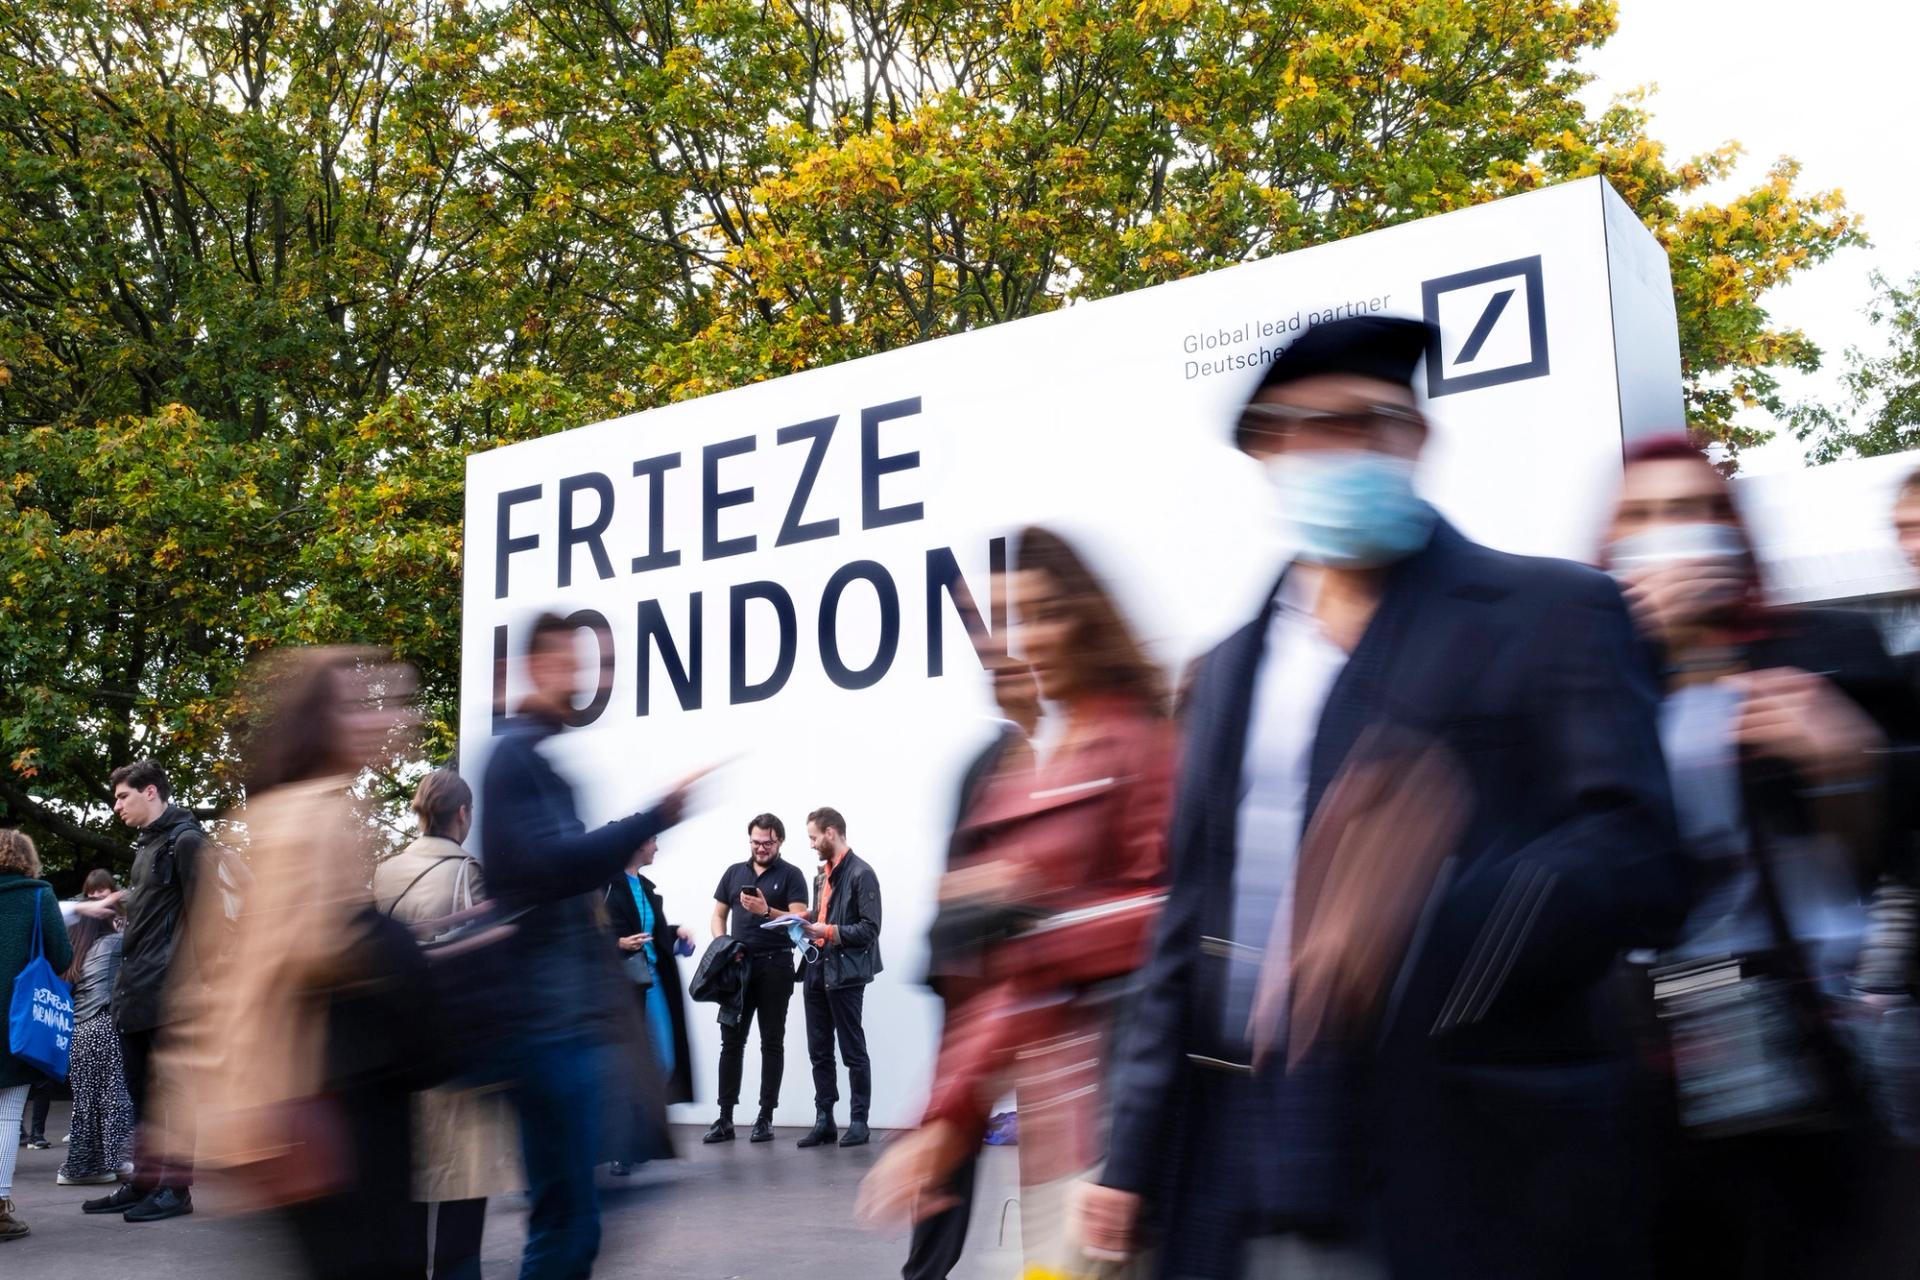 Frieze London 2022 will take place in Regent's Park from 12 to 16 October. Photo by Linda Nylind. Courtesy of Linda Nylind/Frieze.